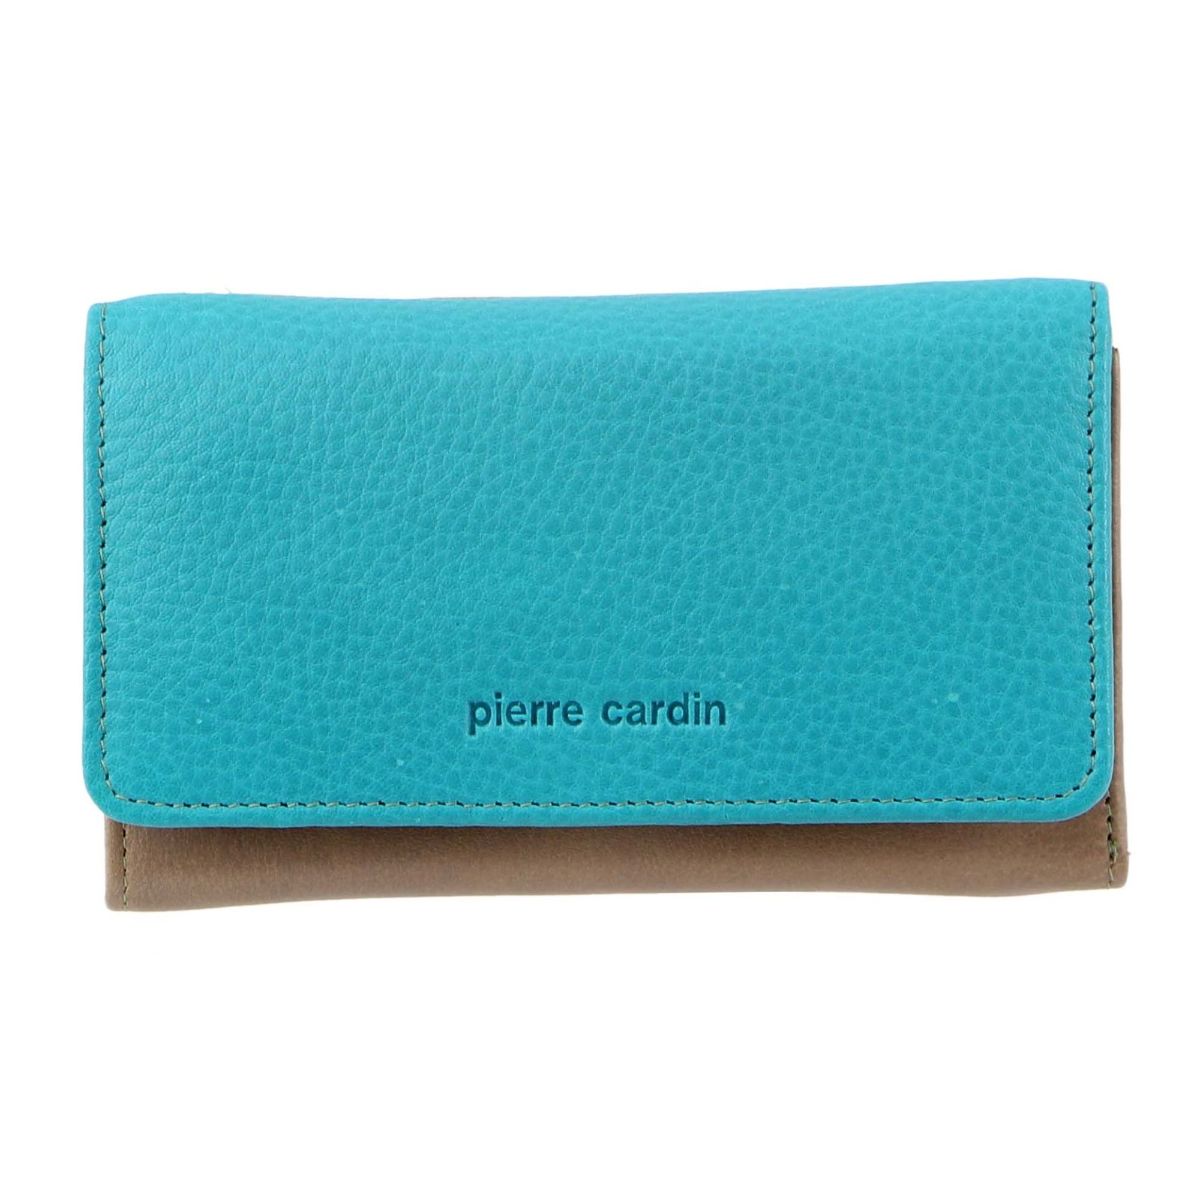 Pierre Cardin MultiColour Leather Ladies Tri-Fold Wallet in Turquoise